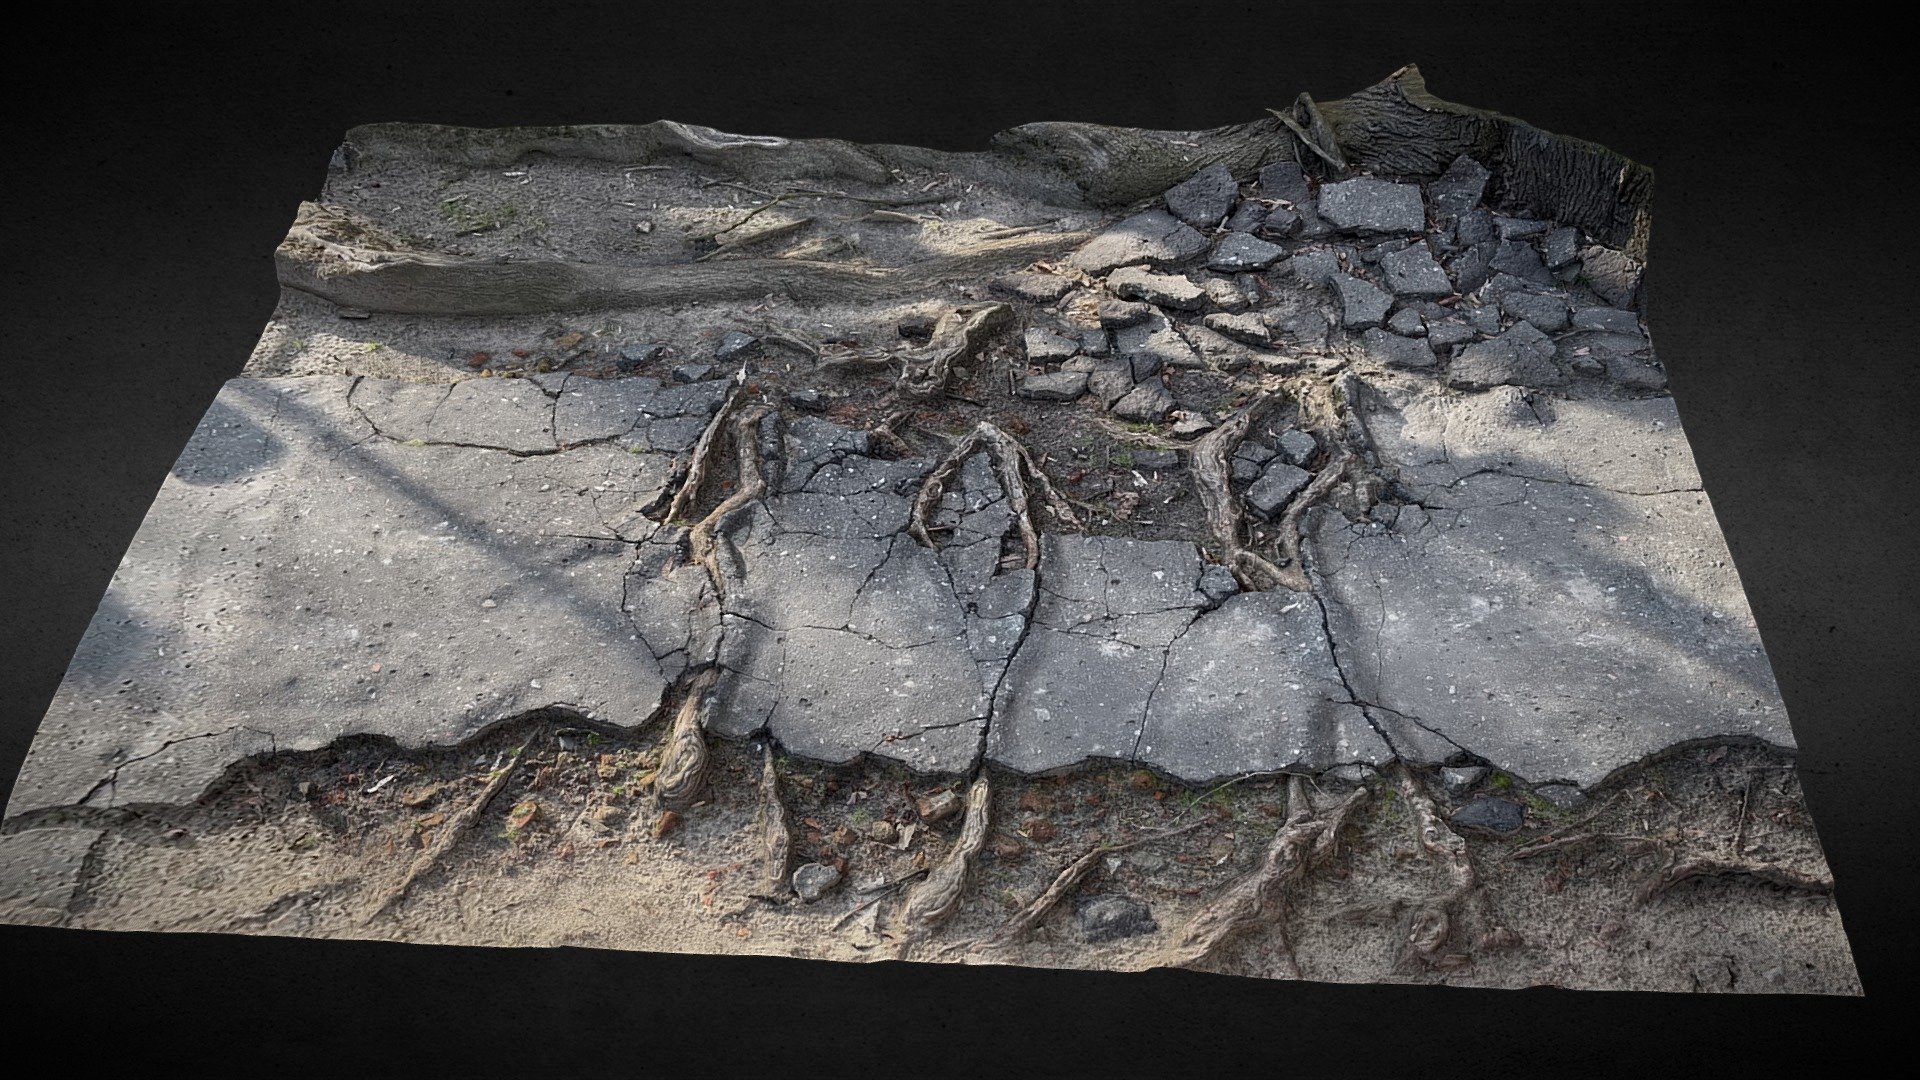 made on canon mkII lens 35mm
maps 8k: diffuse
maps 4k: roughness, nrm, bump, ao
cleaned geometry, no retopology - tree roots road asphalt photogrammetry - Buy Royalty Free 3D model by scanforge (@looppy) 3d model